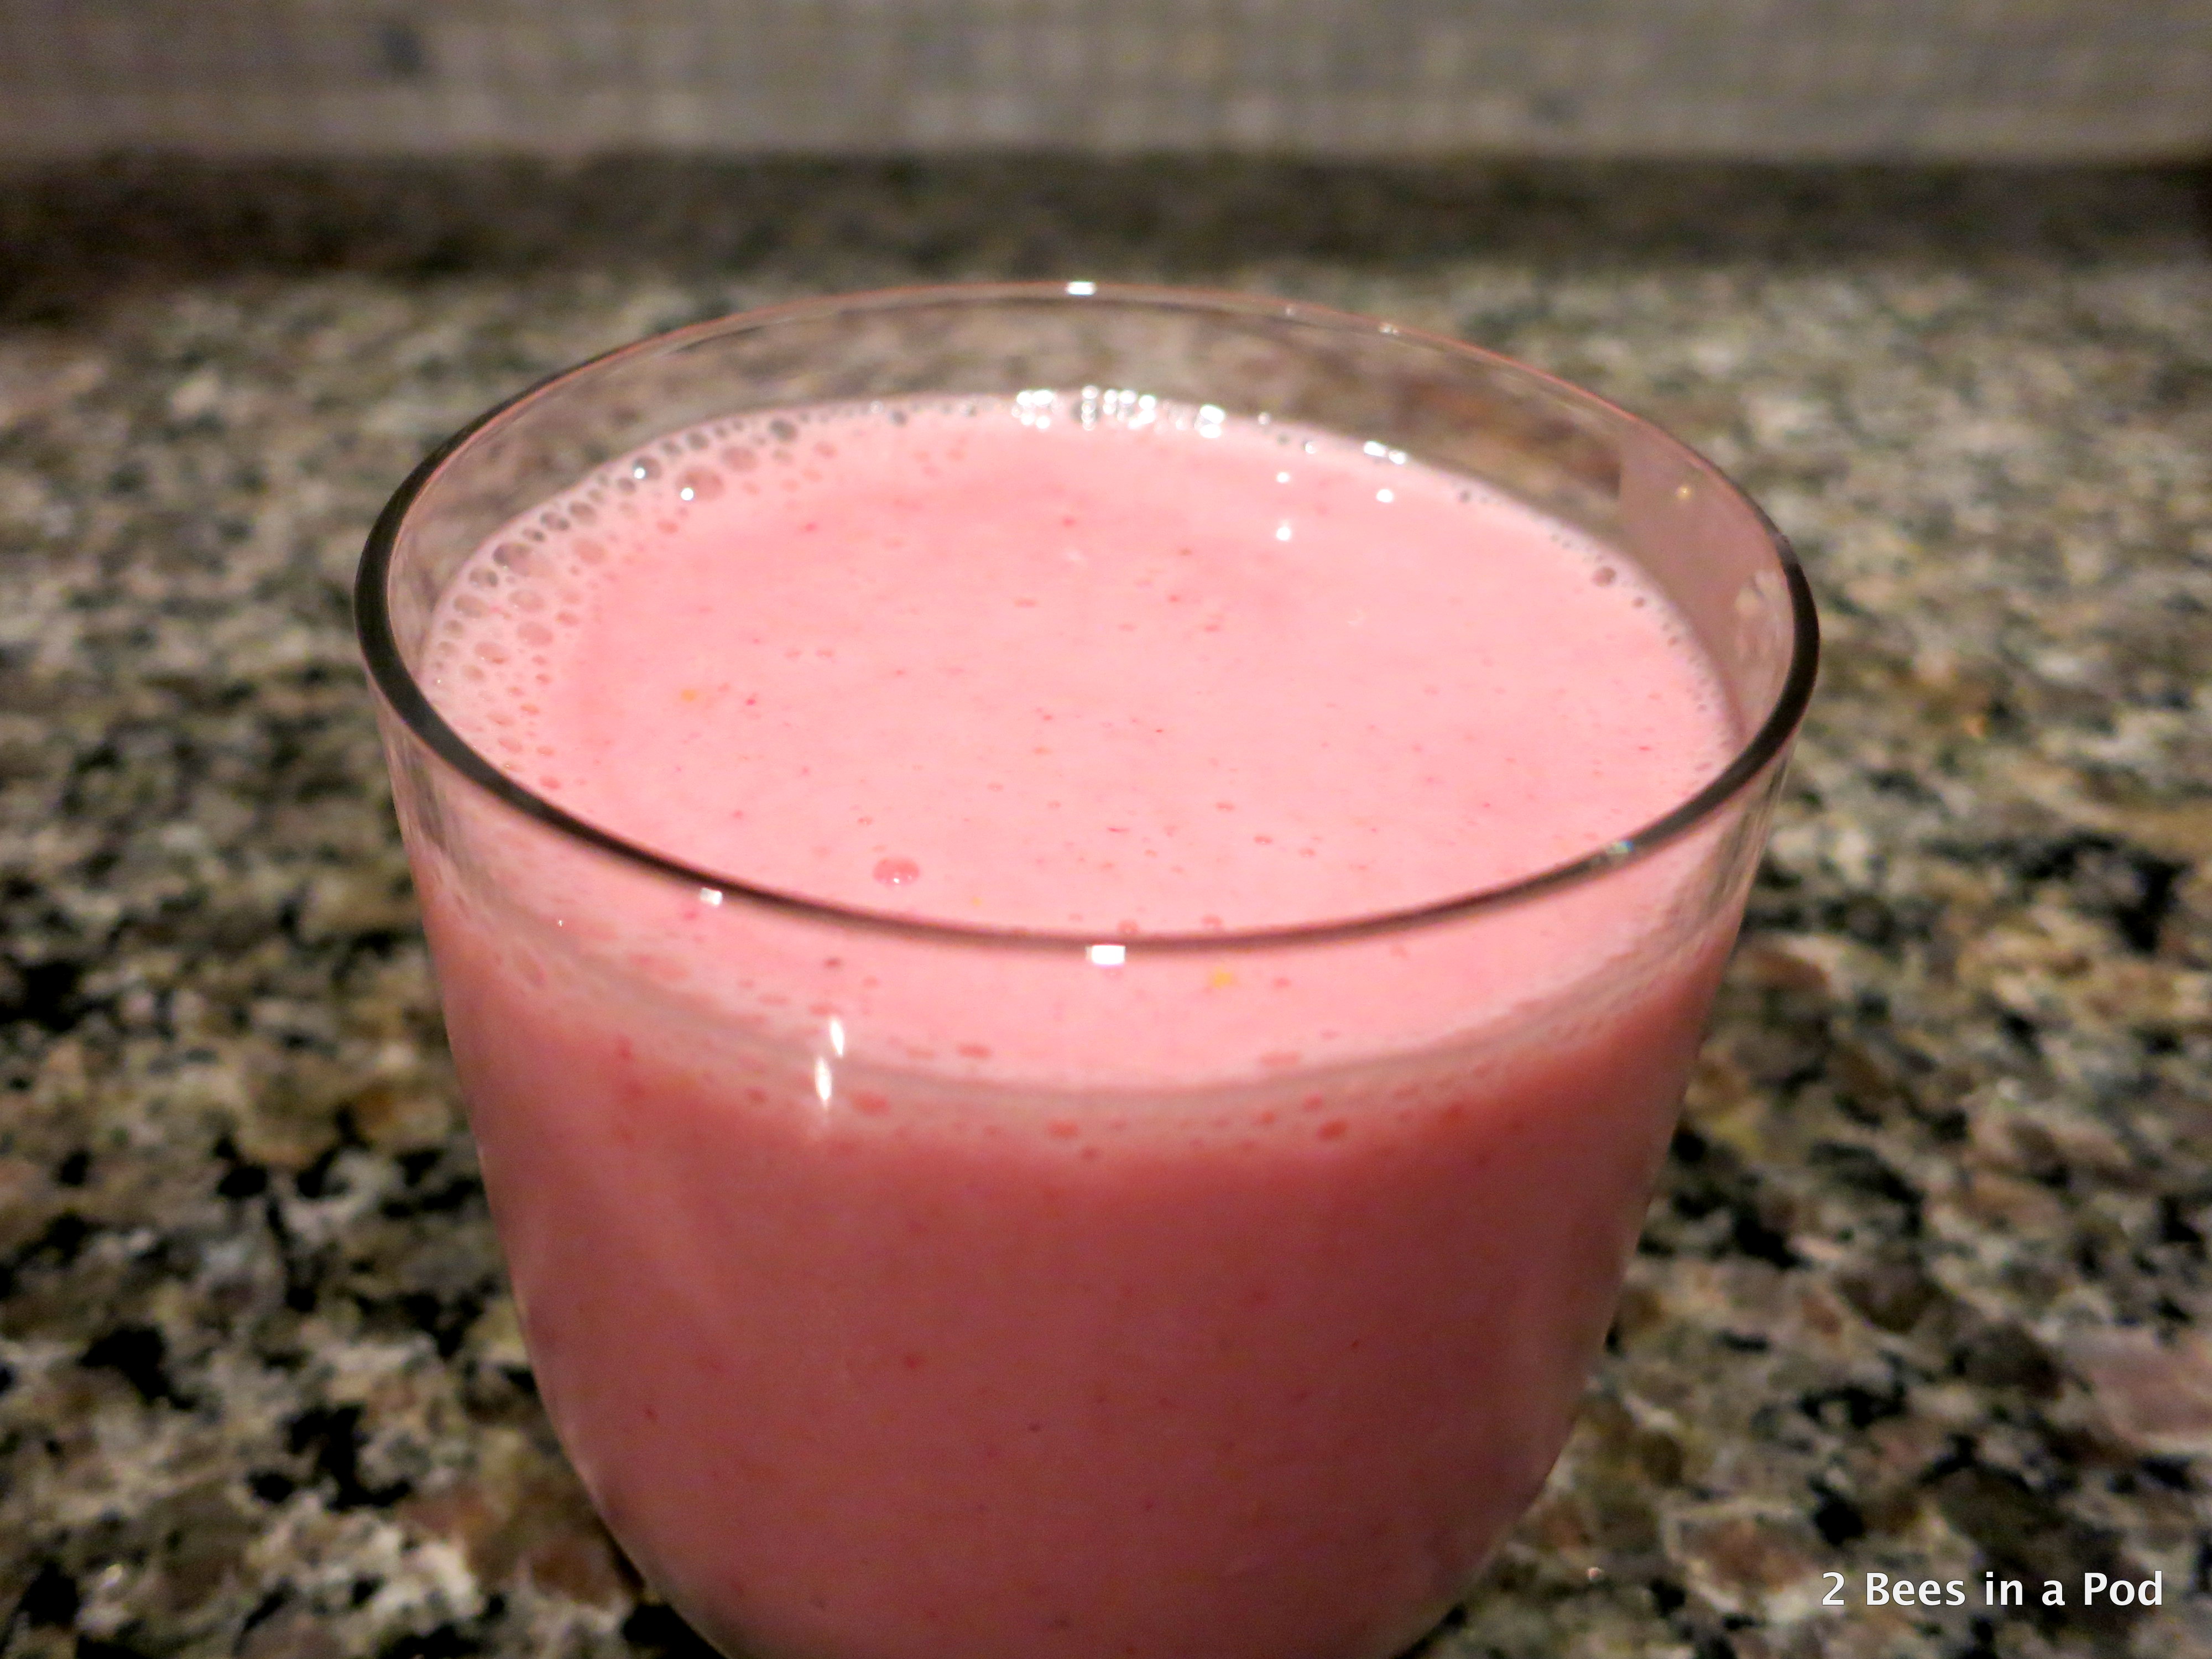 Strawberry Banana Smoothie with Agave Nectar, Fage, and Almond Milk